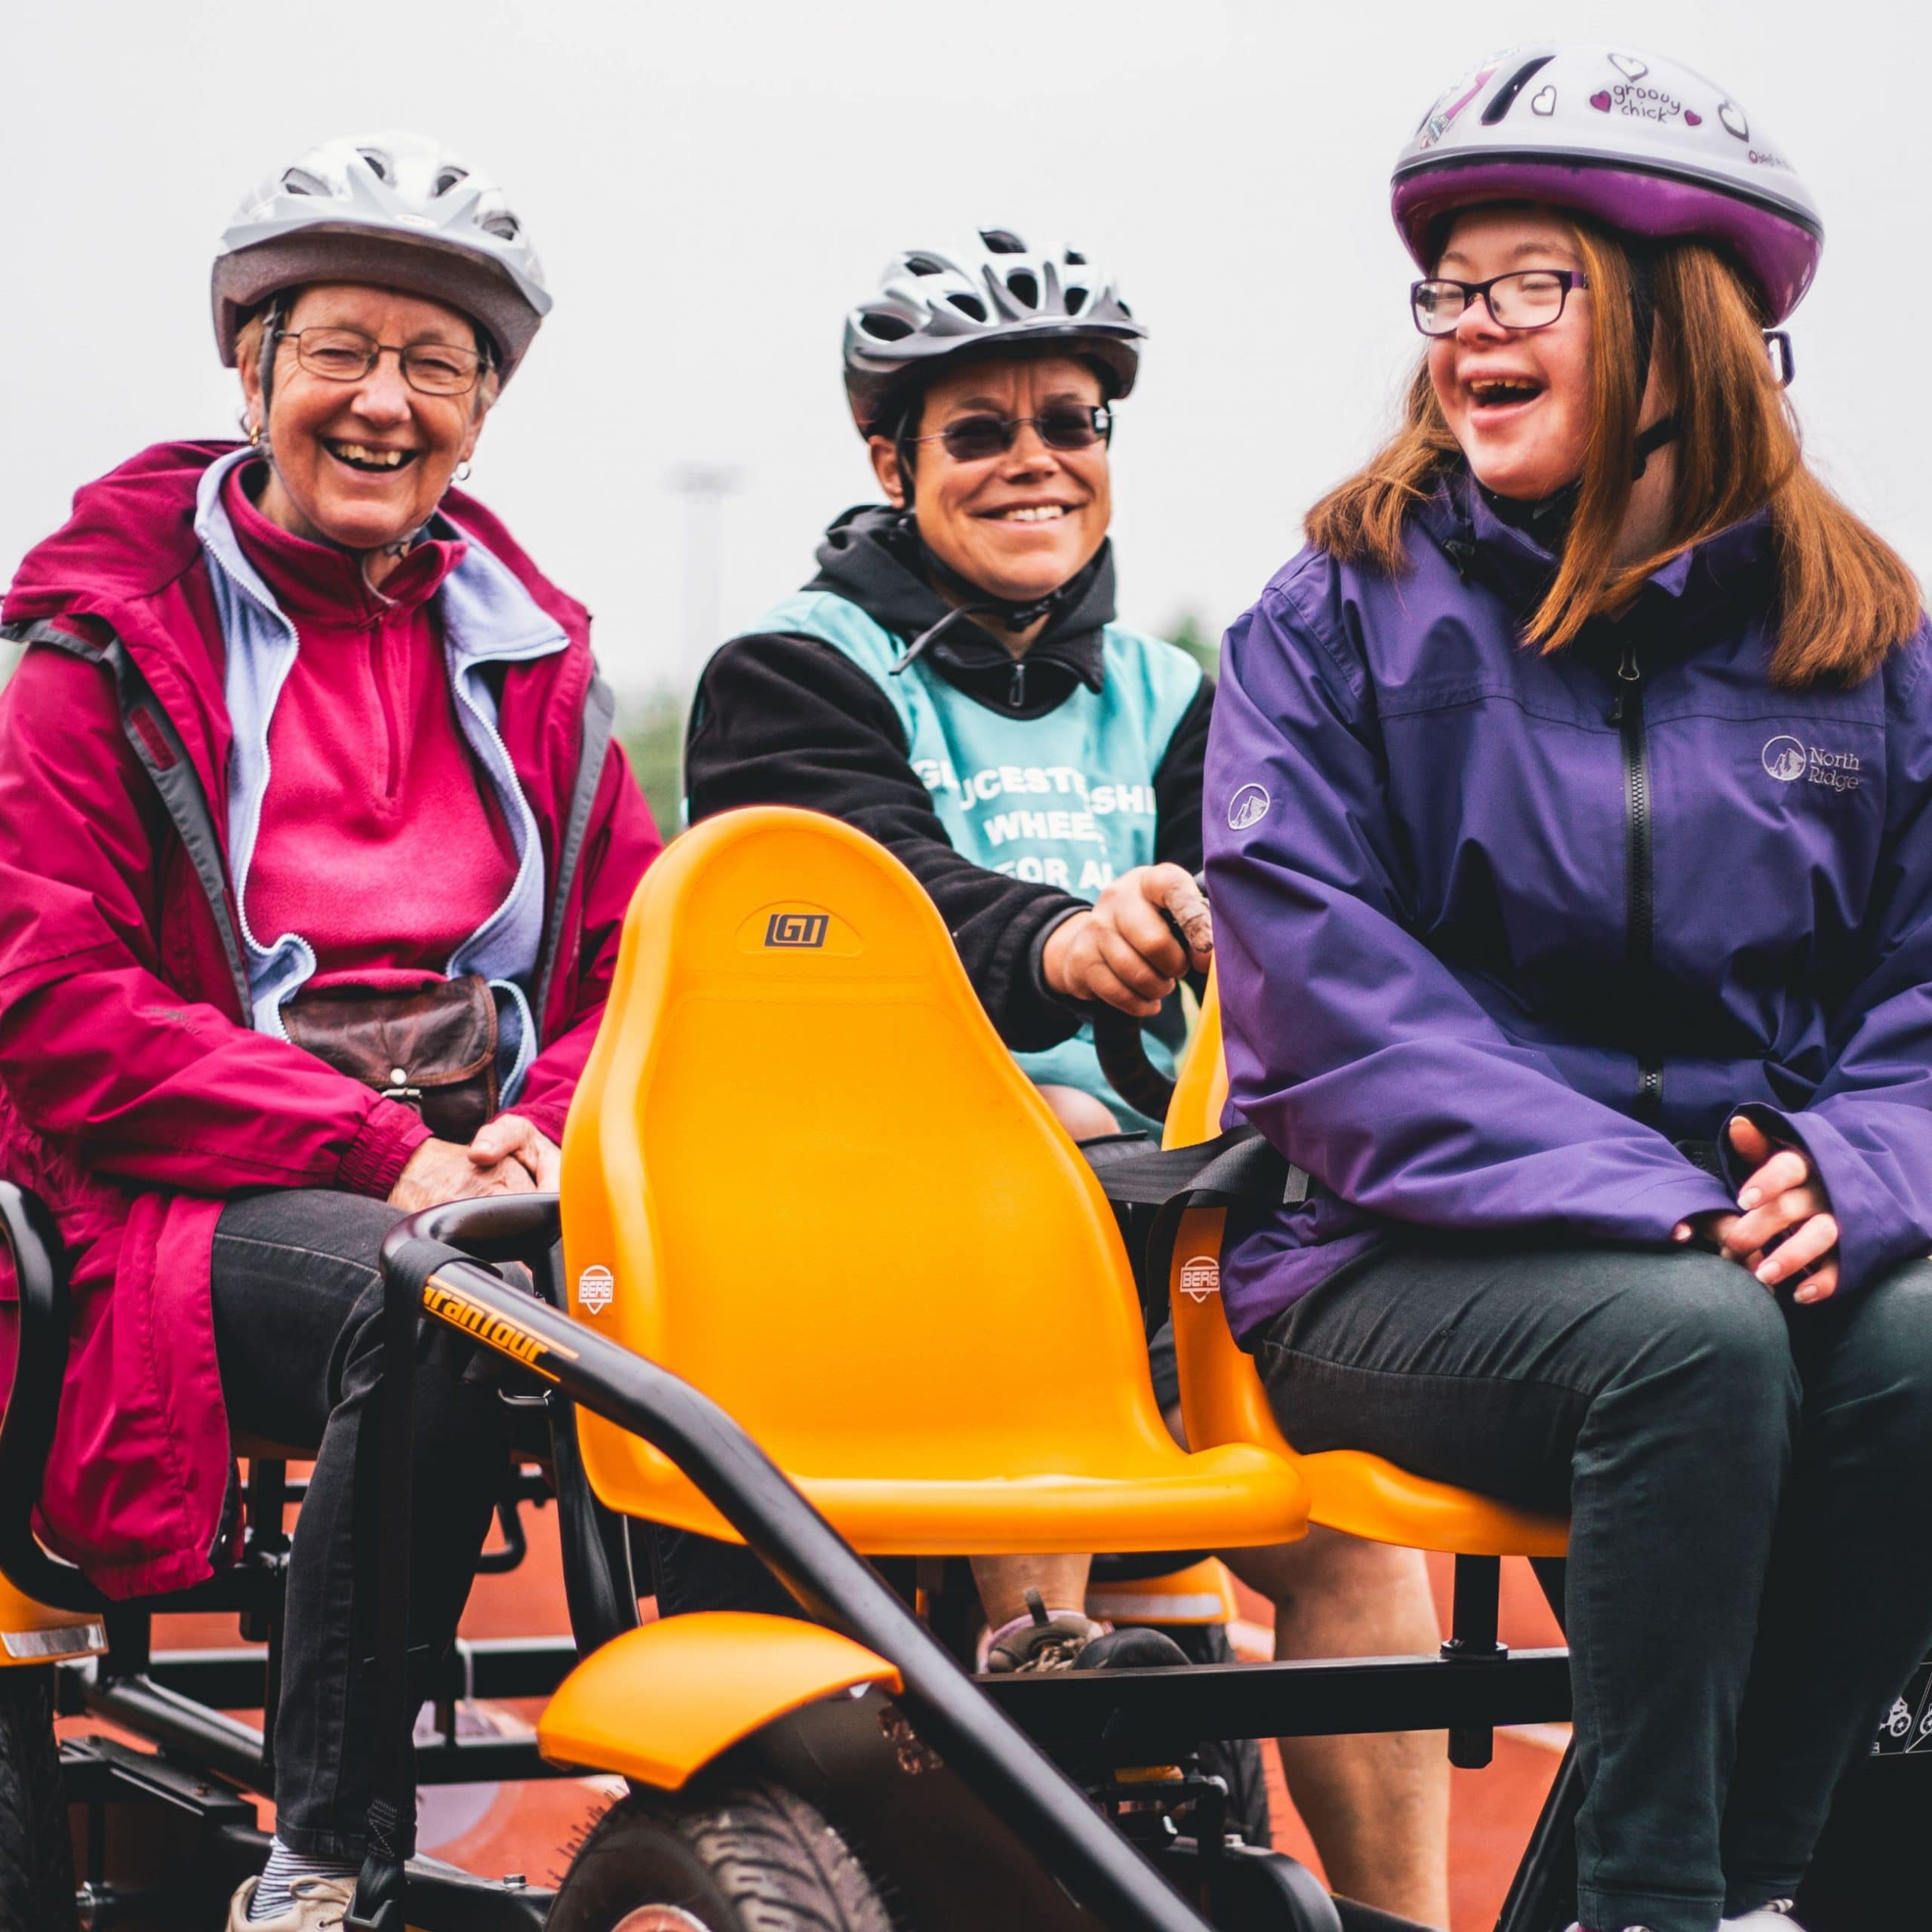 People riding on an adapted disabilitybicycle smiling and laughing